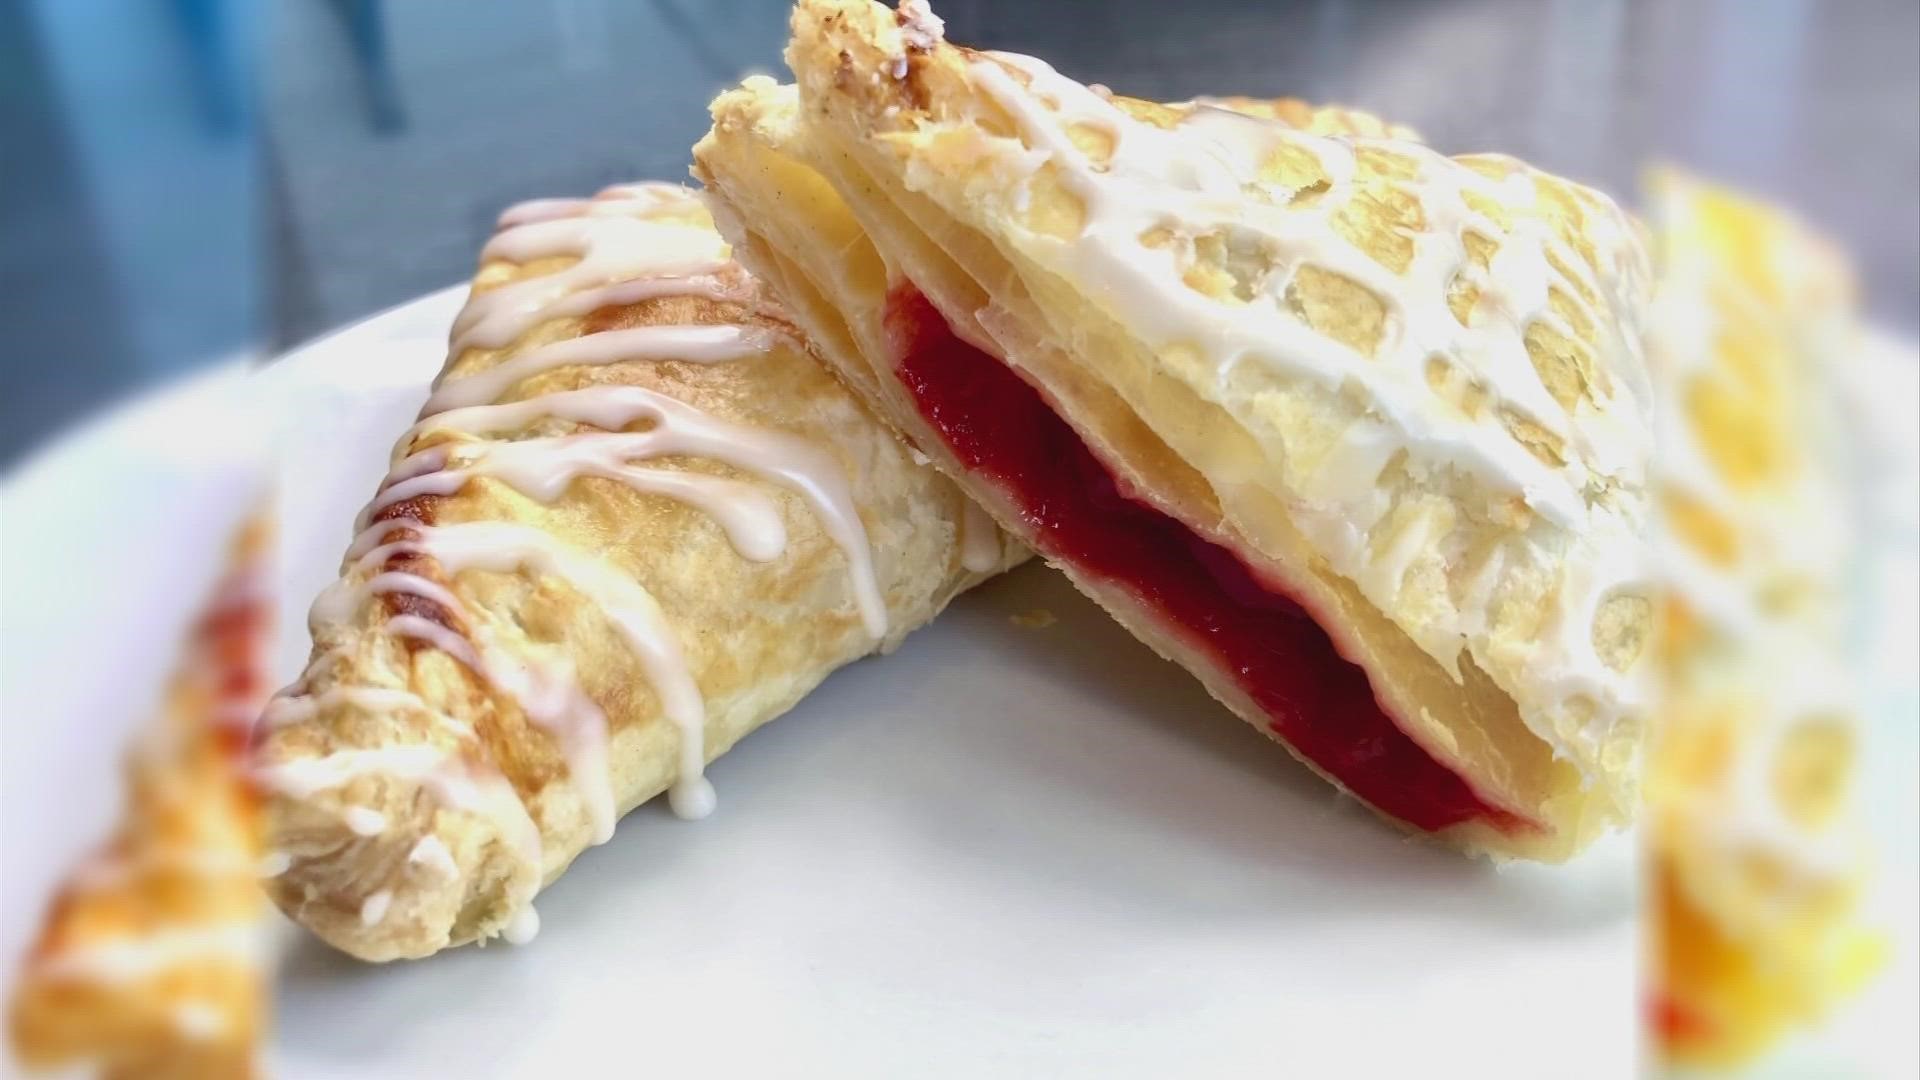 10TV's Brittany Bailey gets into the baking spirit for National Cherry Turnover Day.